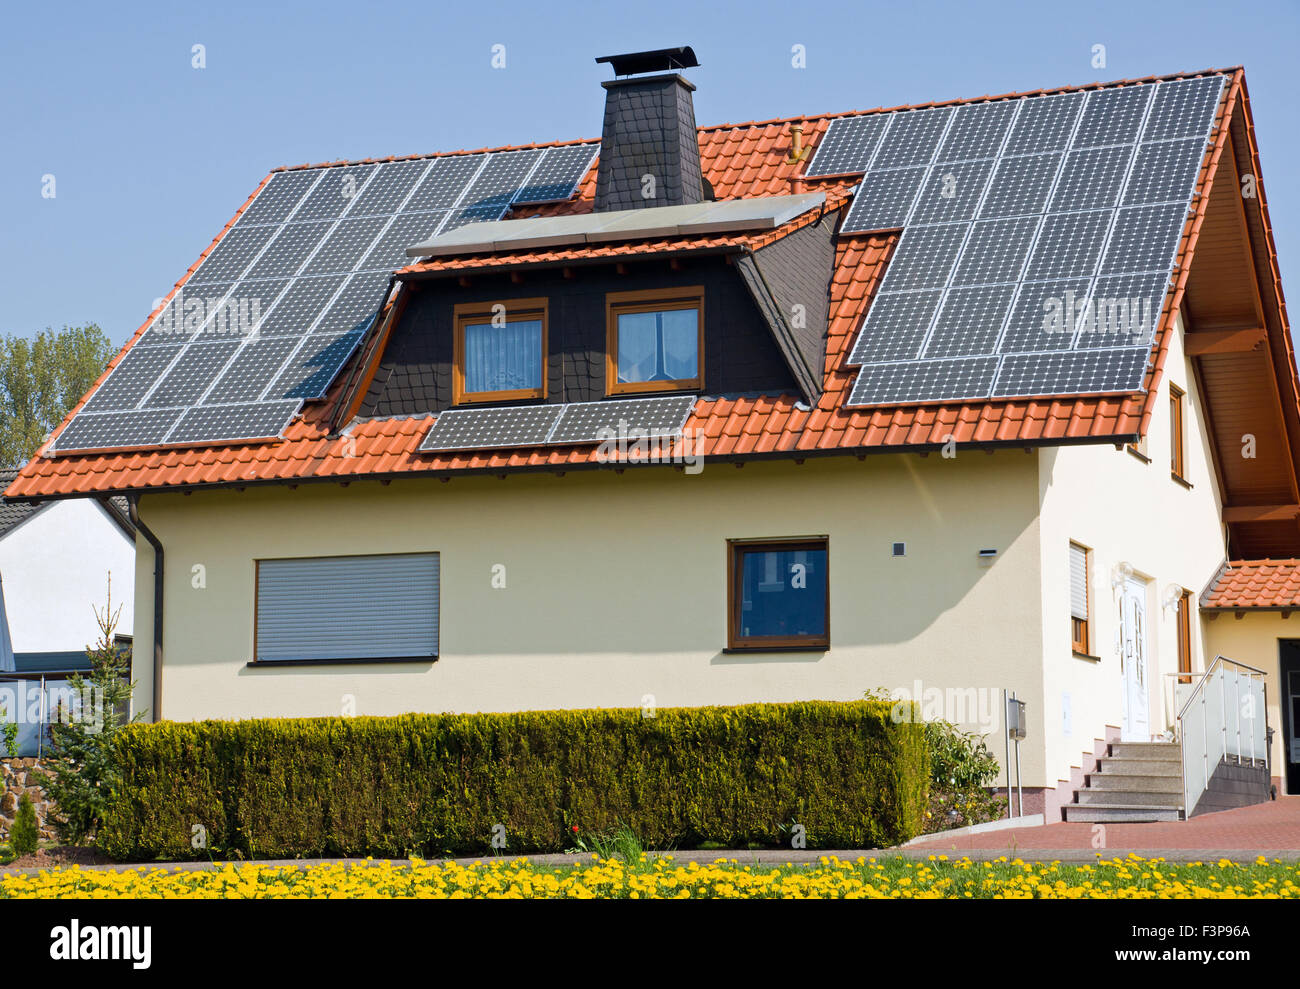 Solar panels on the roof of a single occupancy house Stock Photo